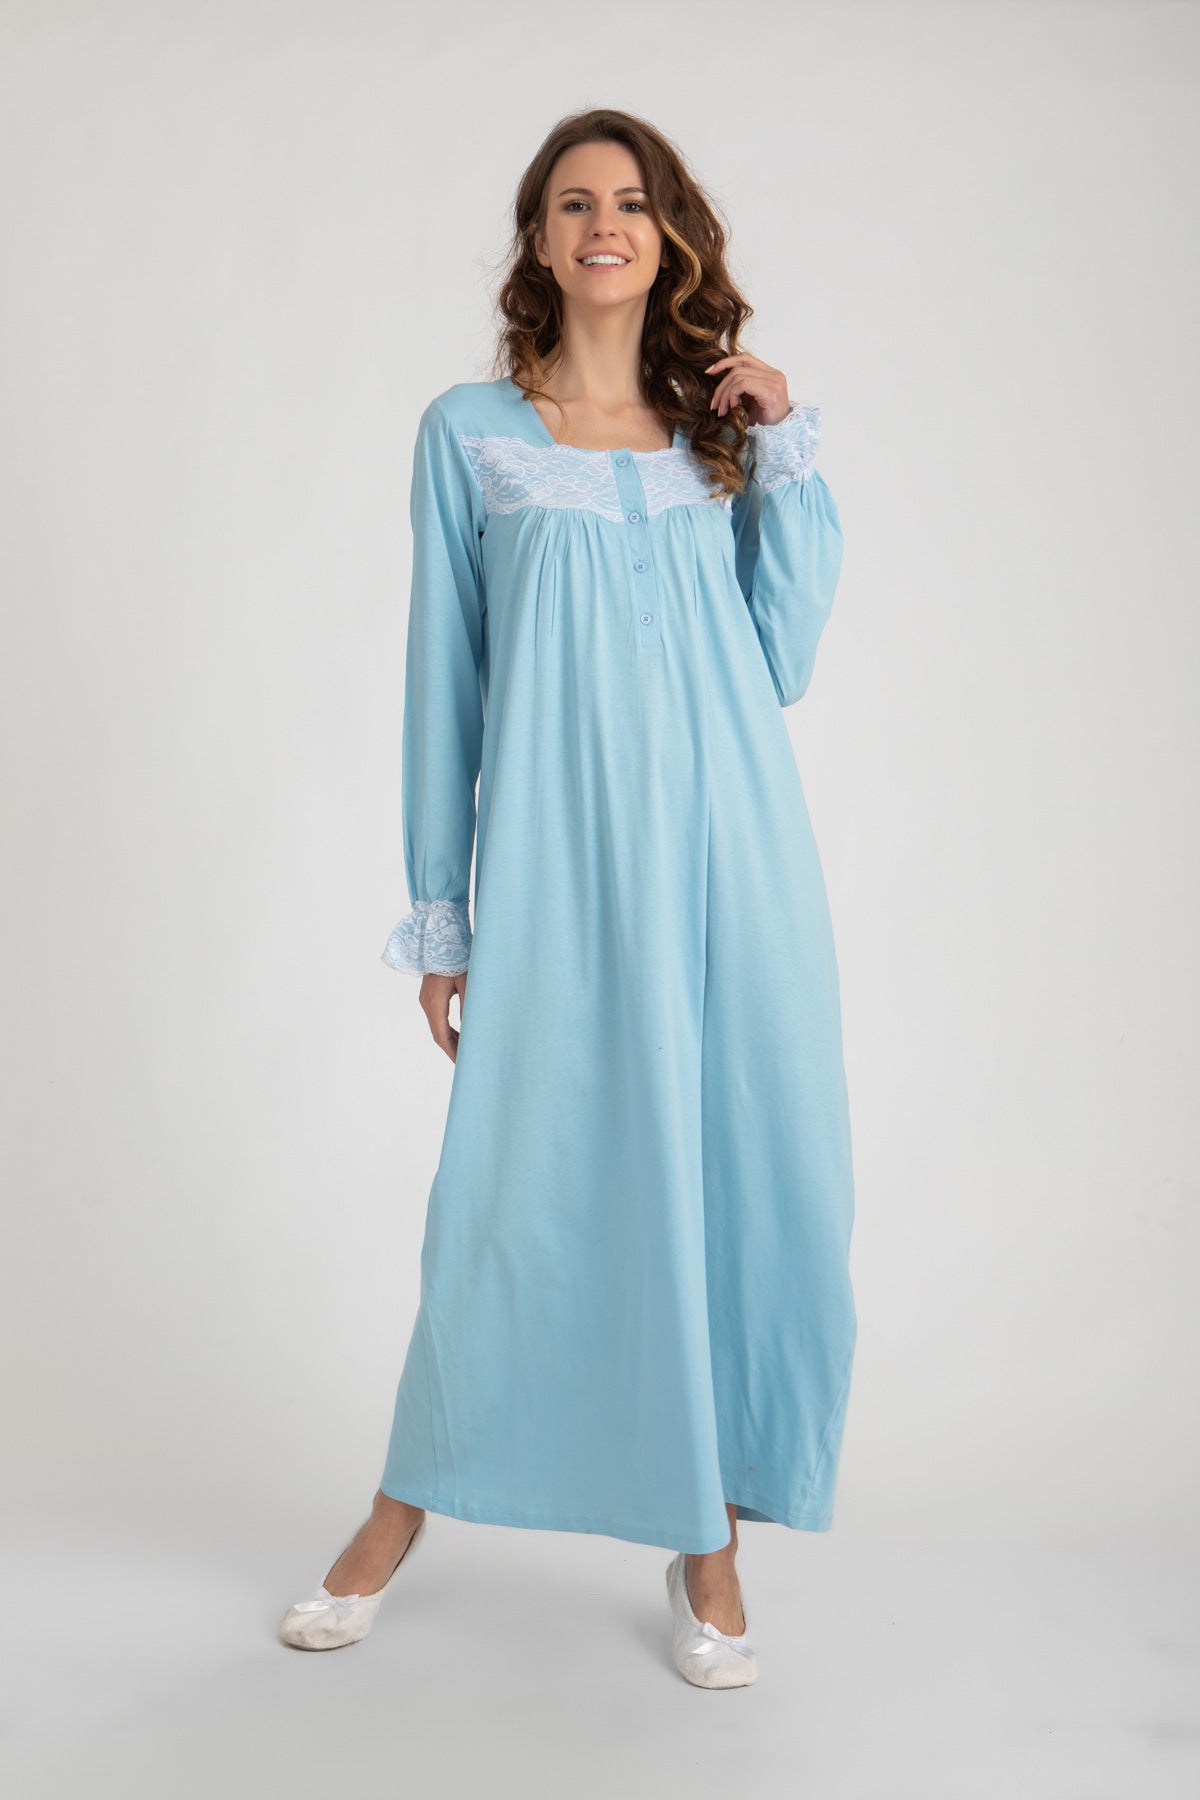 Classic Charmaine Nightgown With lace Trim